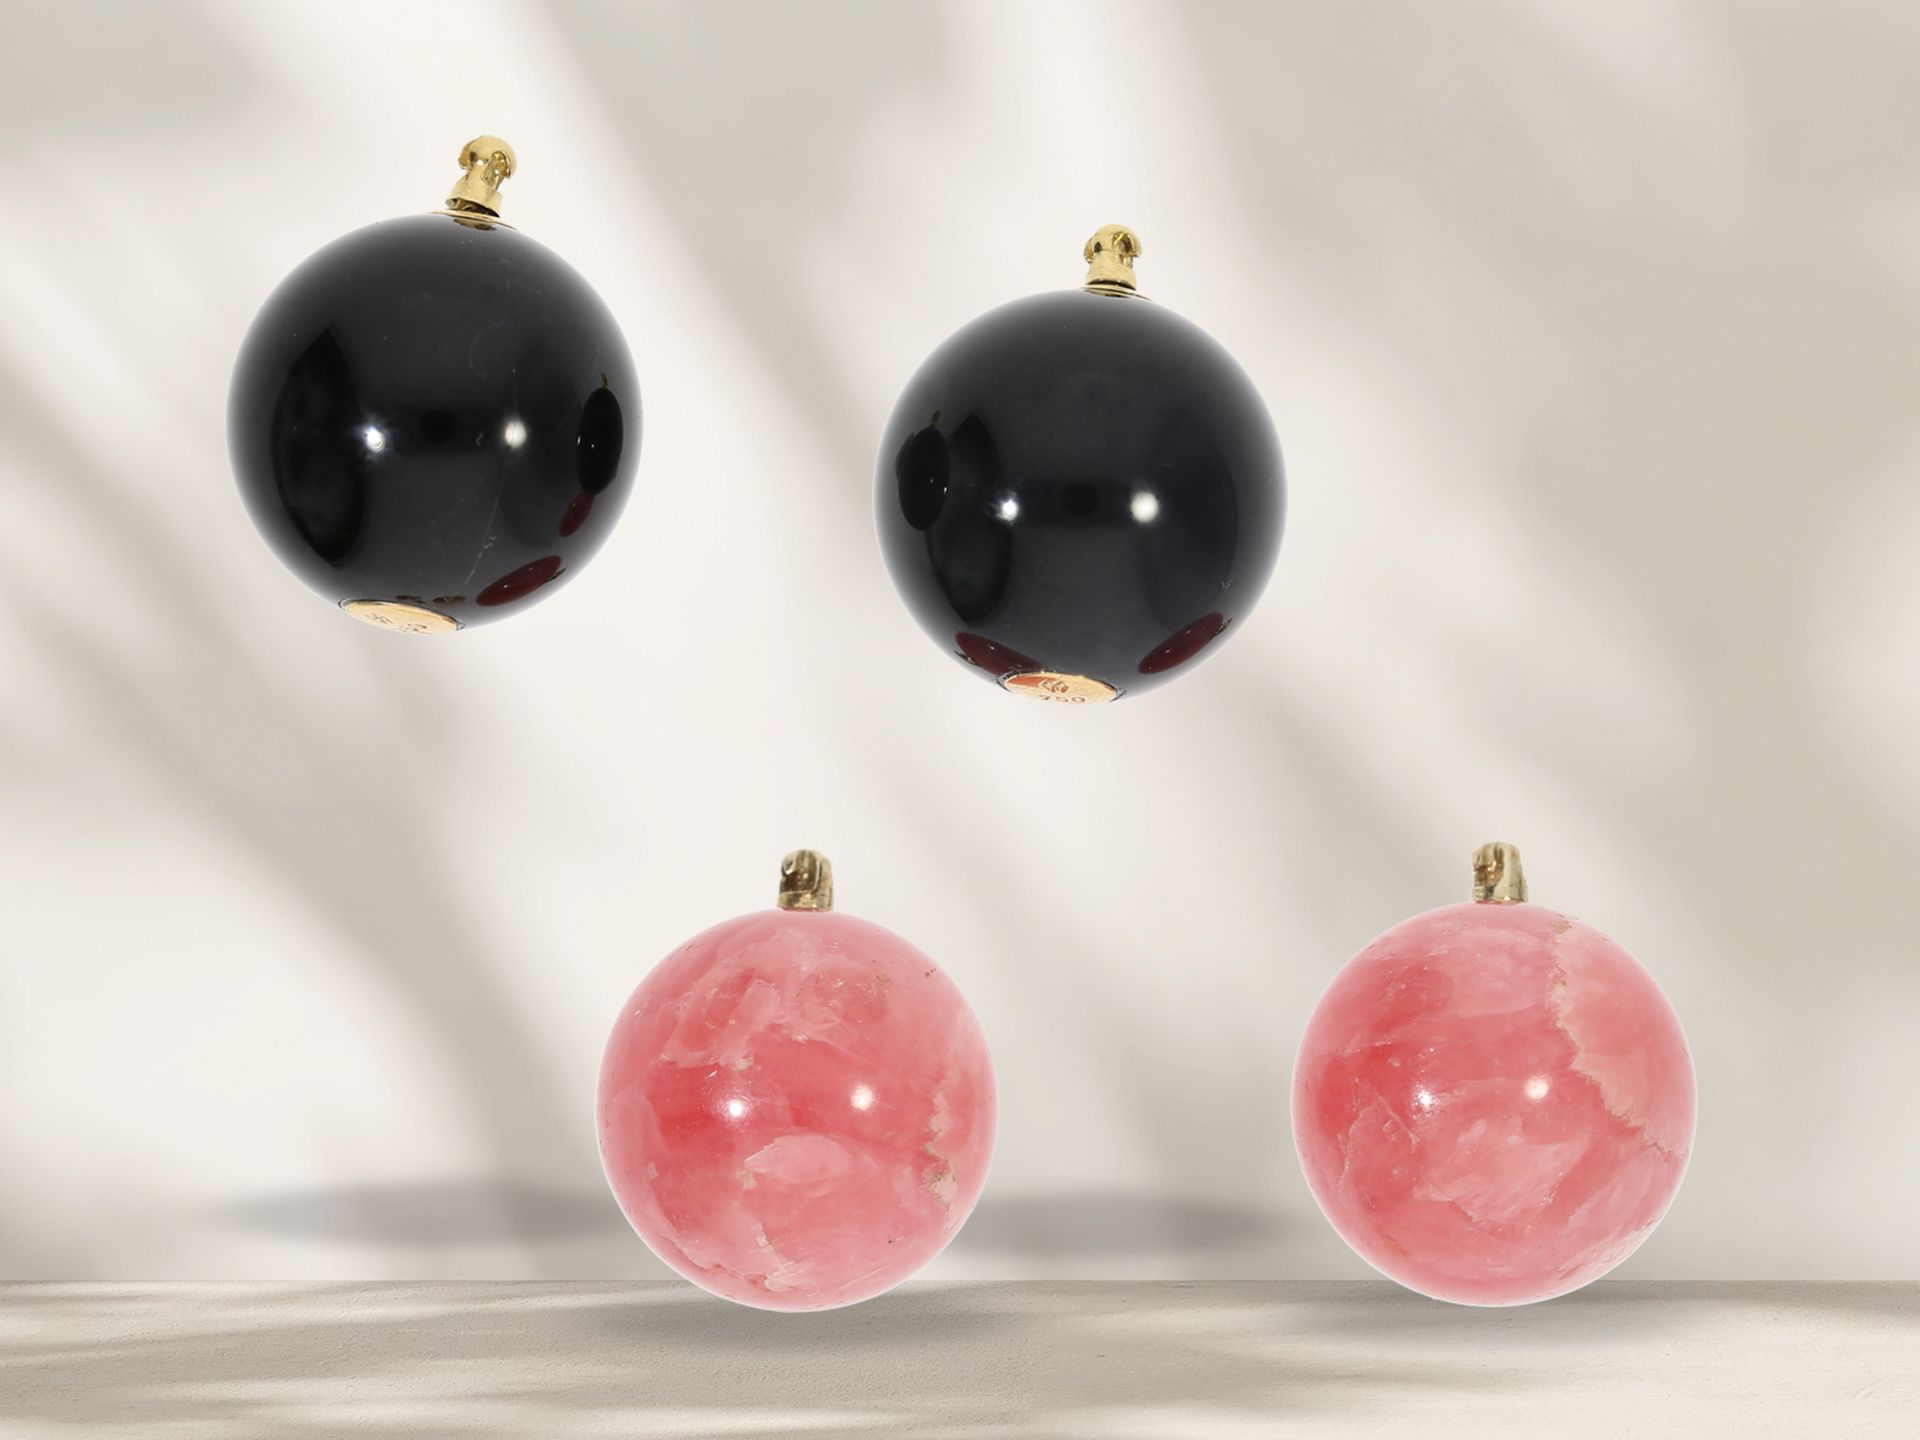 Attractive designer earrings with interchangeable black onyx beads, handcrafted from 18K yellow gold - Image 3 of 4